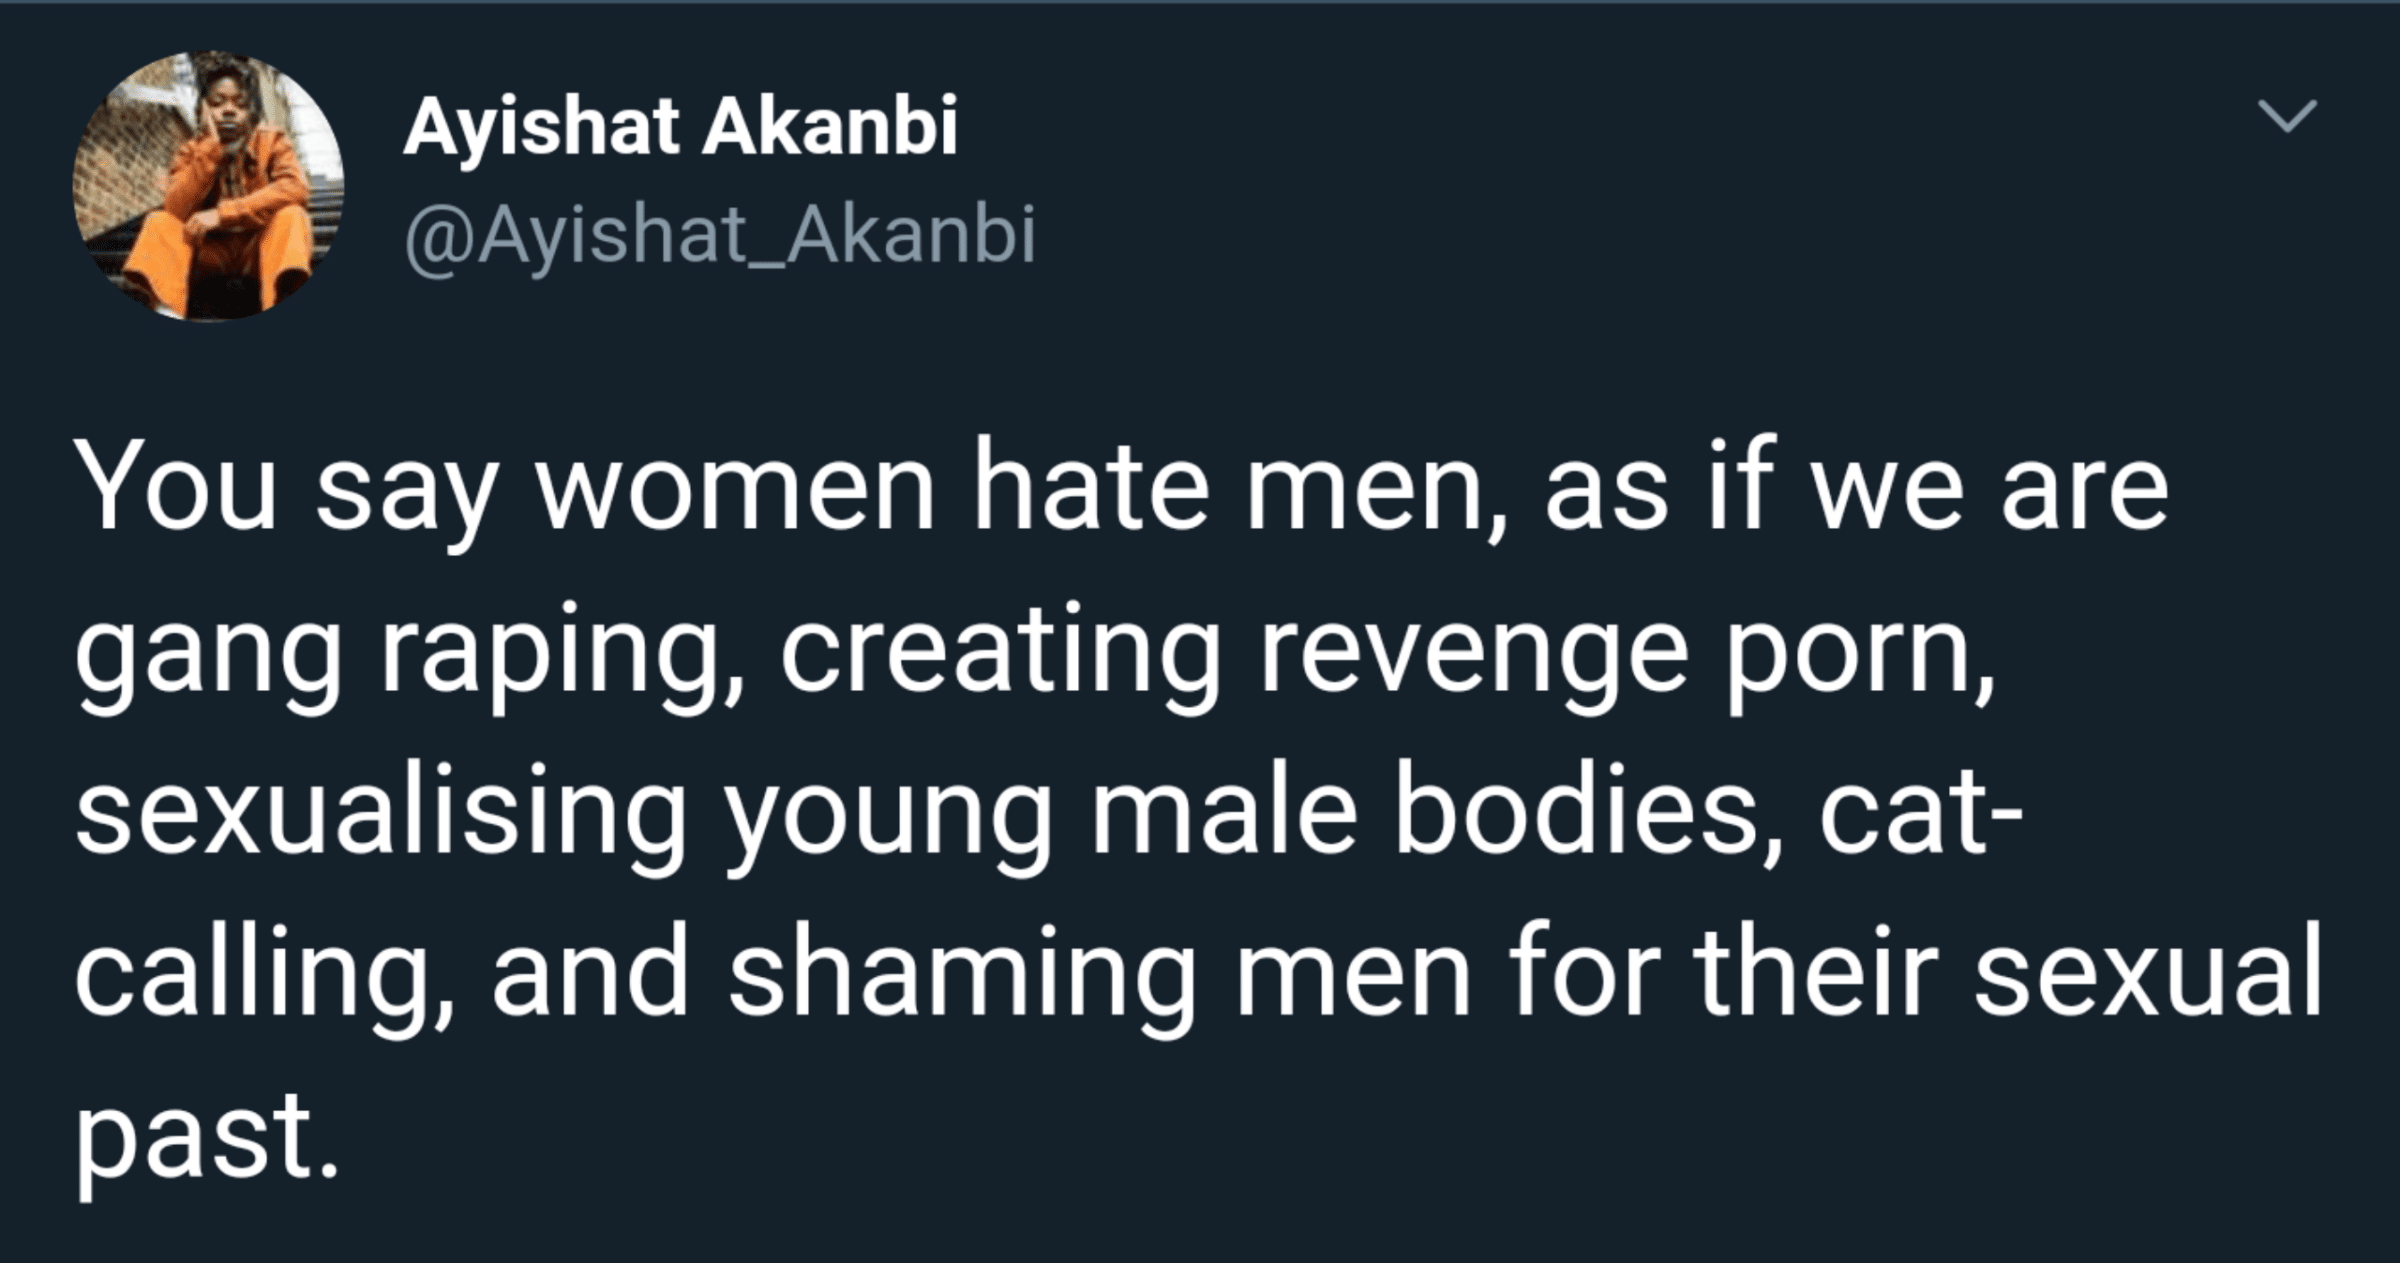 Women, Men, Syrian, No feminine memes Women, Men, Syrian, No text: Ayishat Akanbi @Ayishat_Akanbi You say women hate men, as if we are gang raping, creating revenge porn, sexualising young male bodies, cat- calling, and shaming men for their sexual past. 